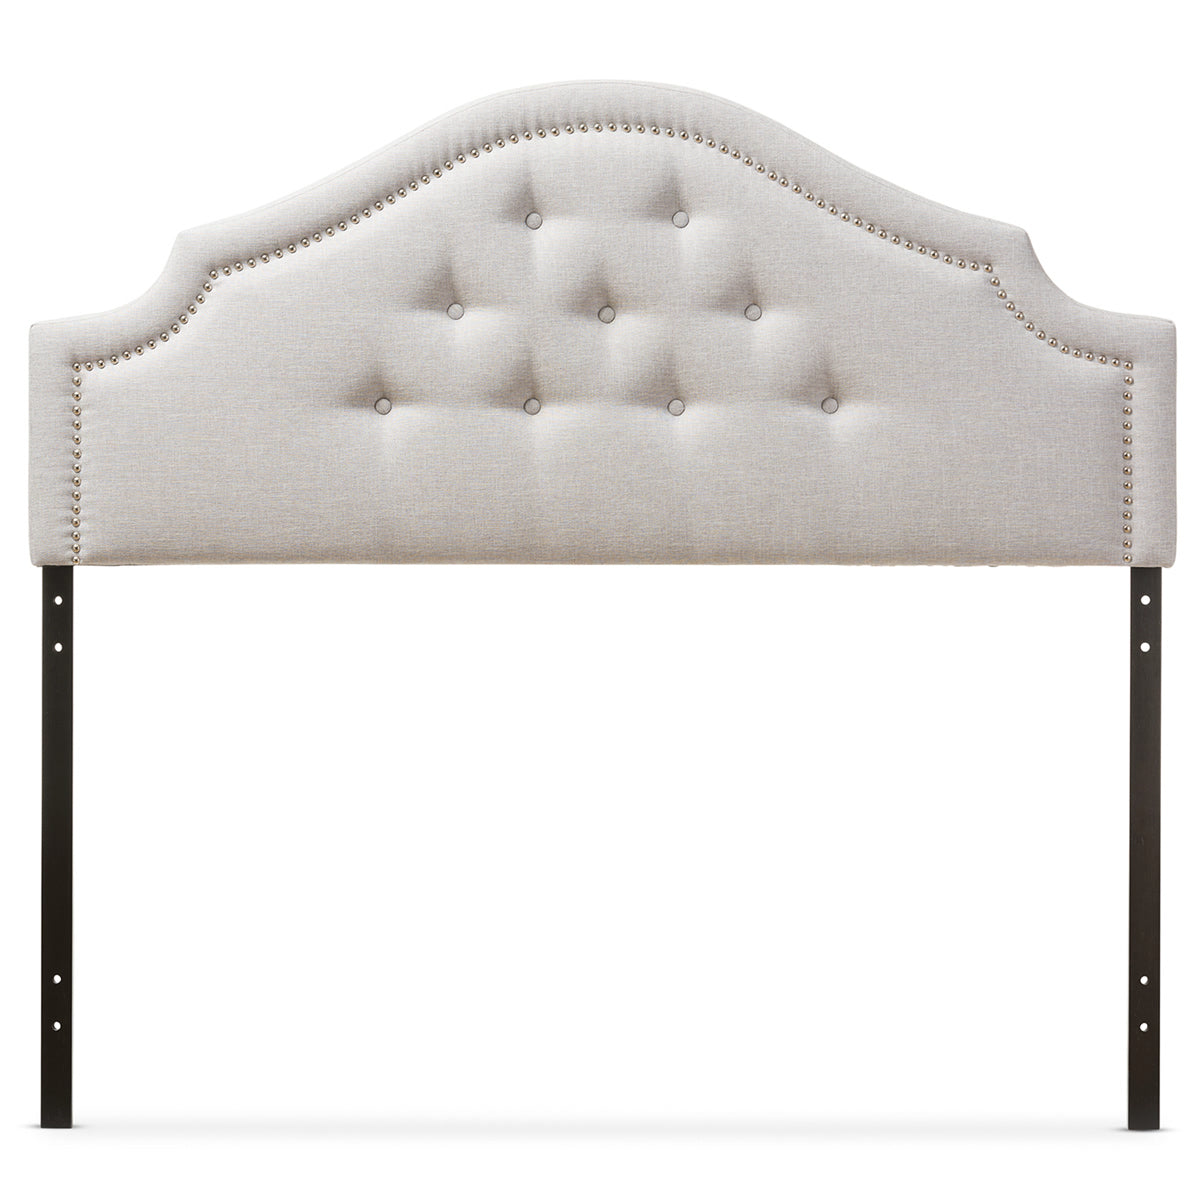 Baxton Studio Cora Modern and Contemporary Grayish Beige Fabric Upholstered King Size Headboard Baxton Studio-King Headboard-Minimal And Modern - 2